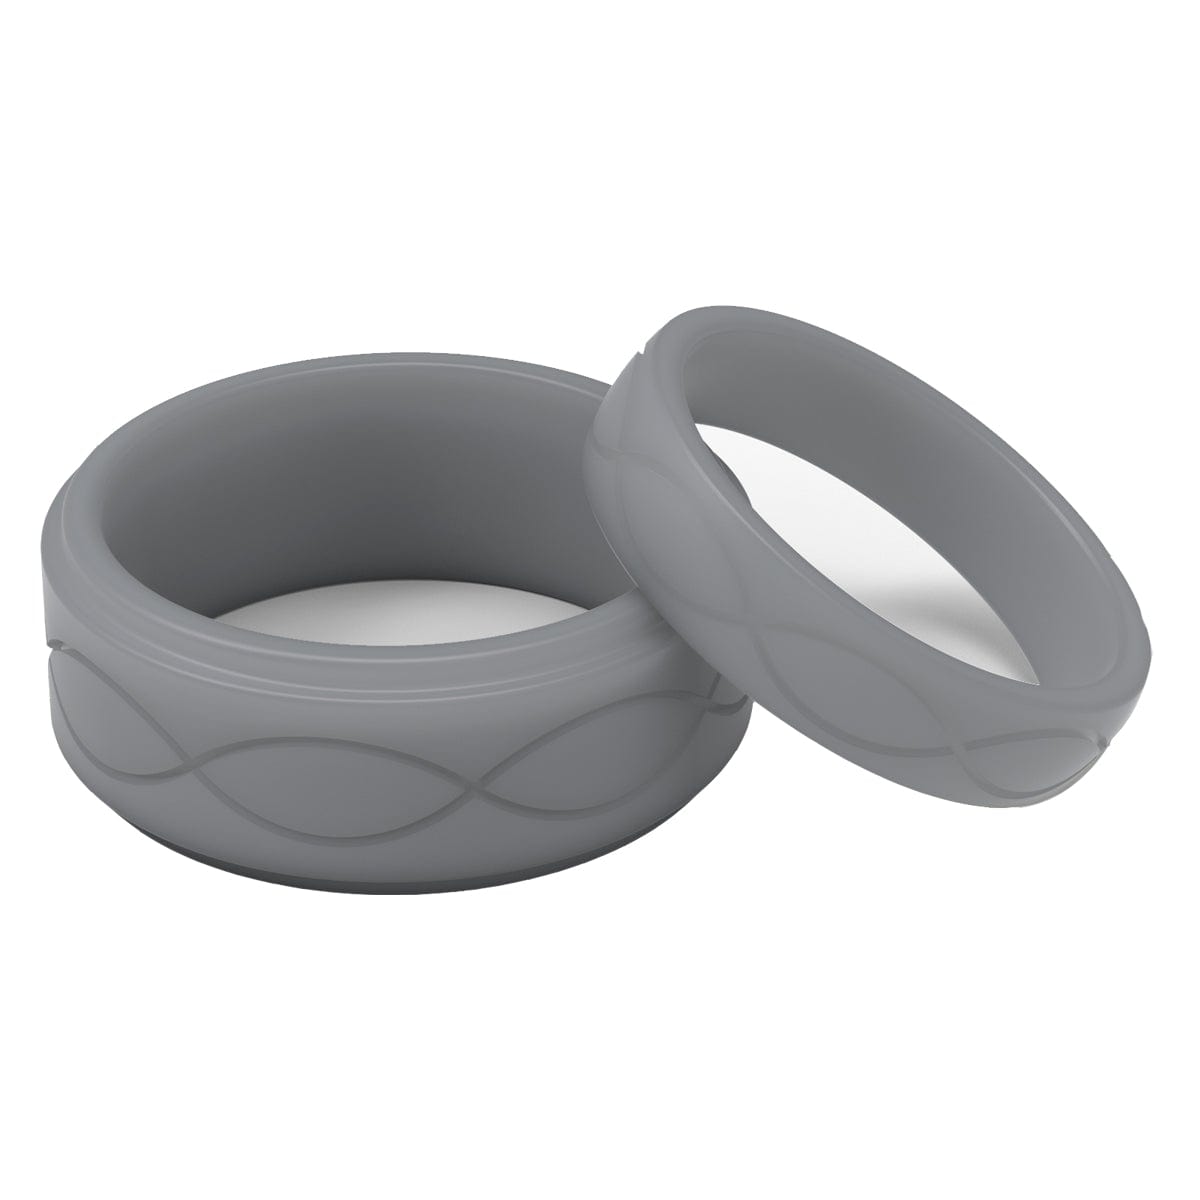 How Tight Should Silicone Rings Be?, Enso Rings